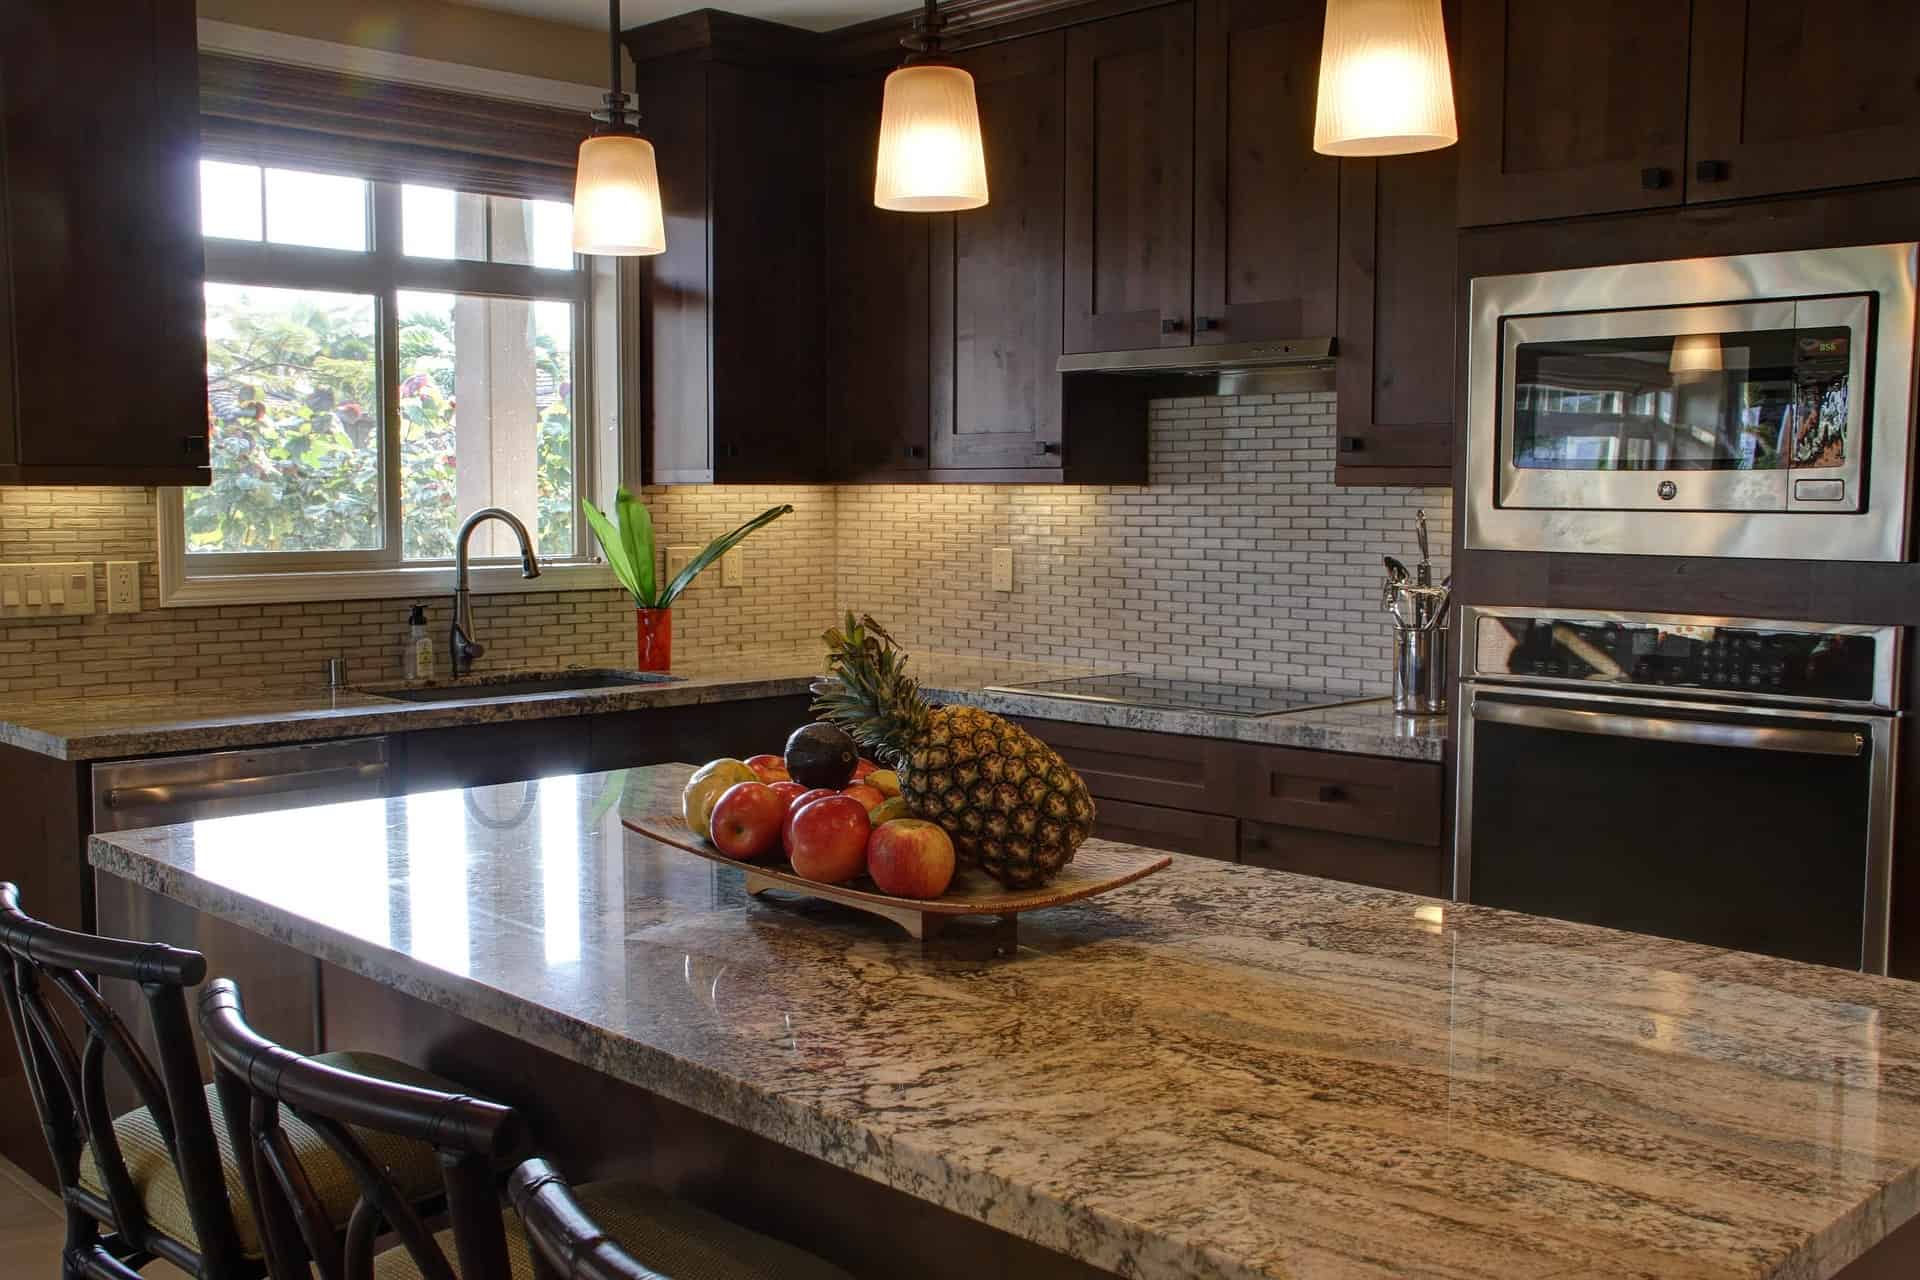 10 Things To Do Daily To Keep Kitchen Counters Clear